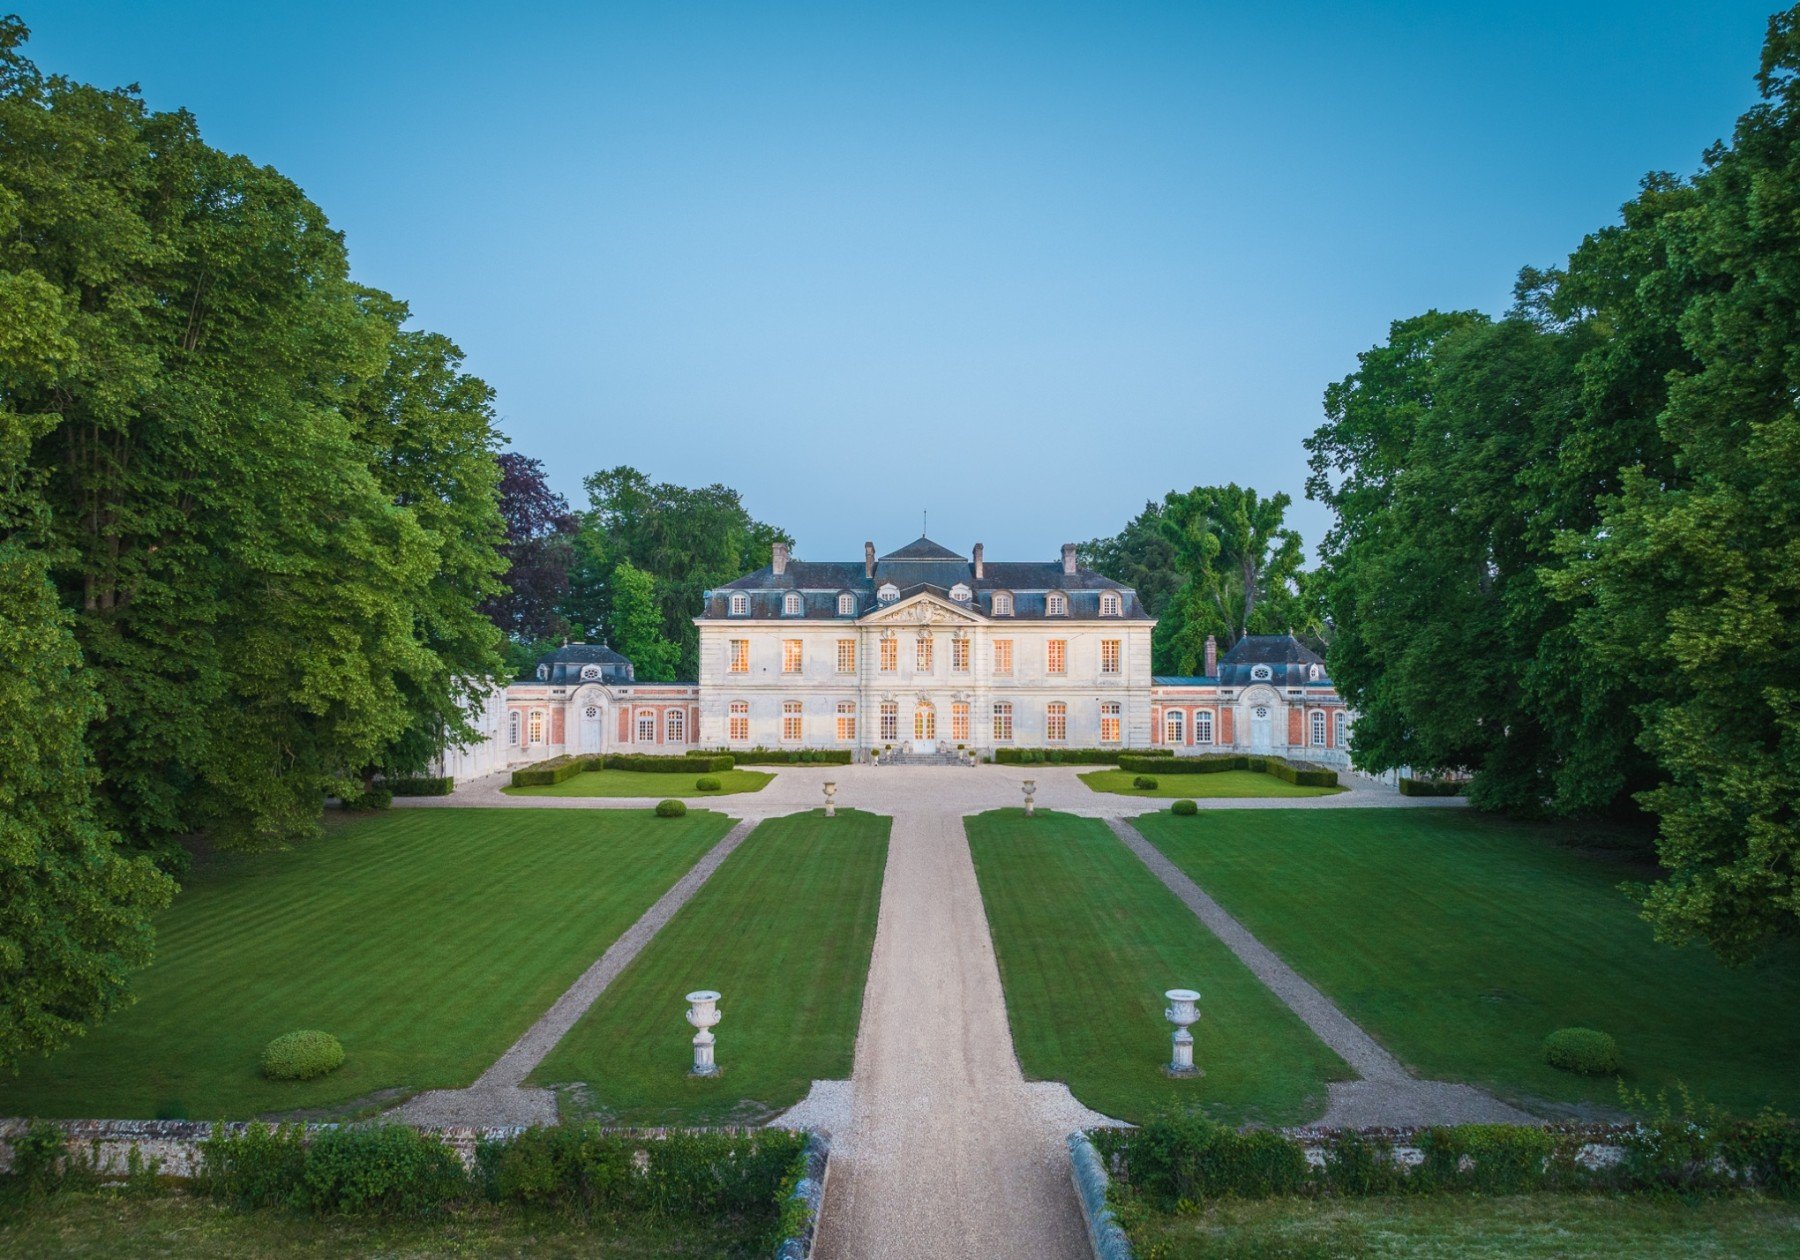 Francis+York+ 18th-Century French Chateau in Normandy  00019.jpg